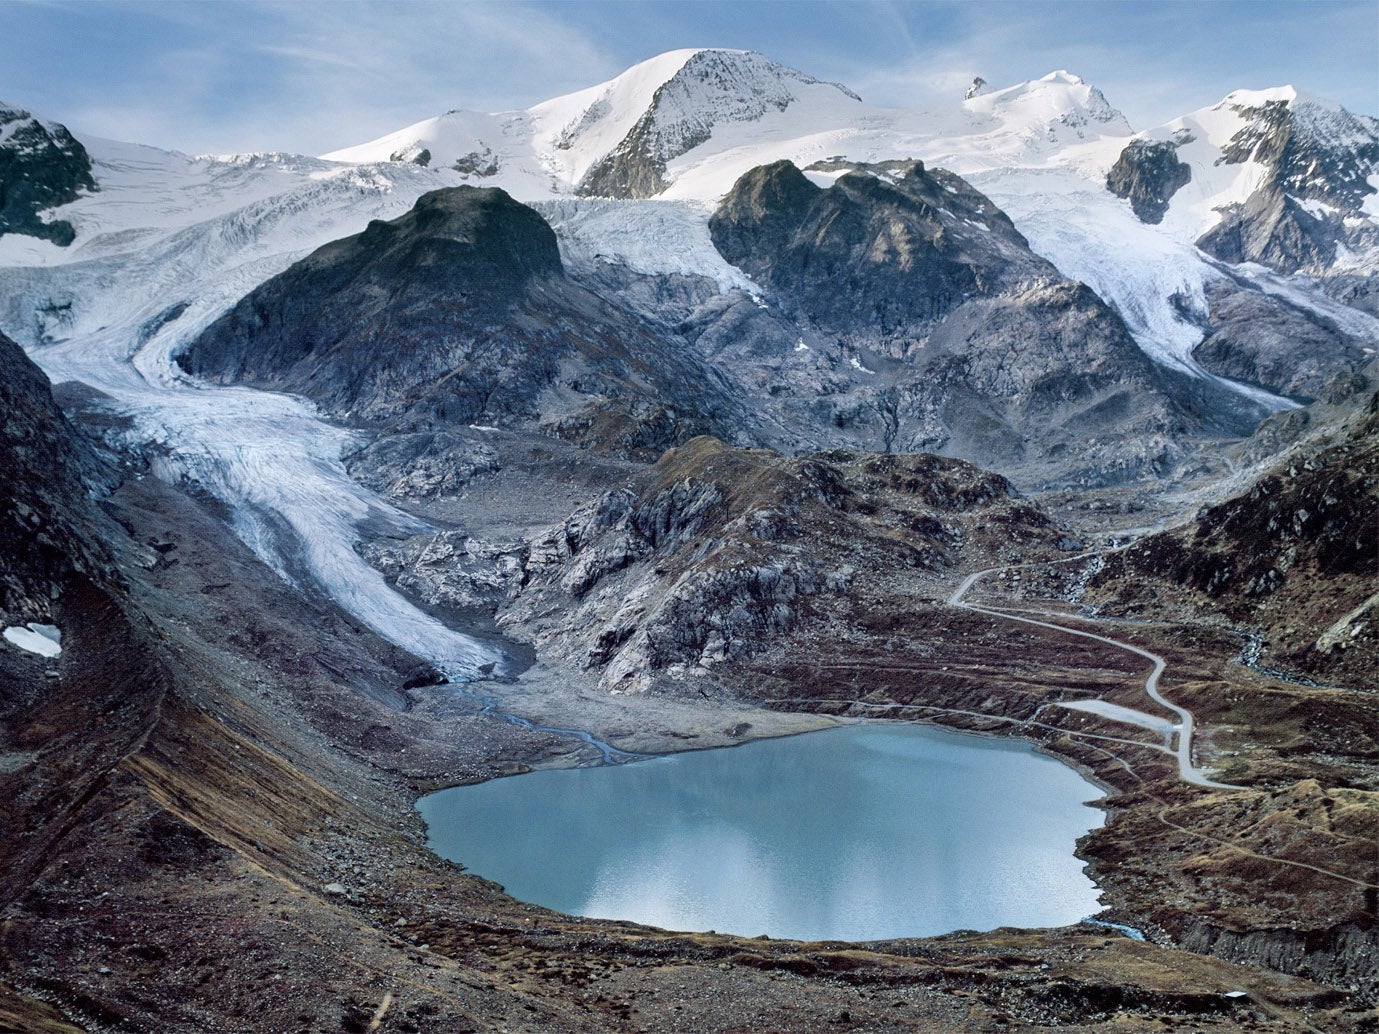 Stein Glacier, in part of the Swiss Alps, on September 17 2011